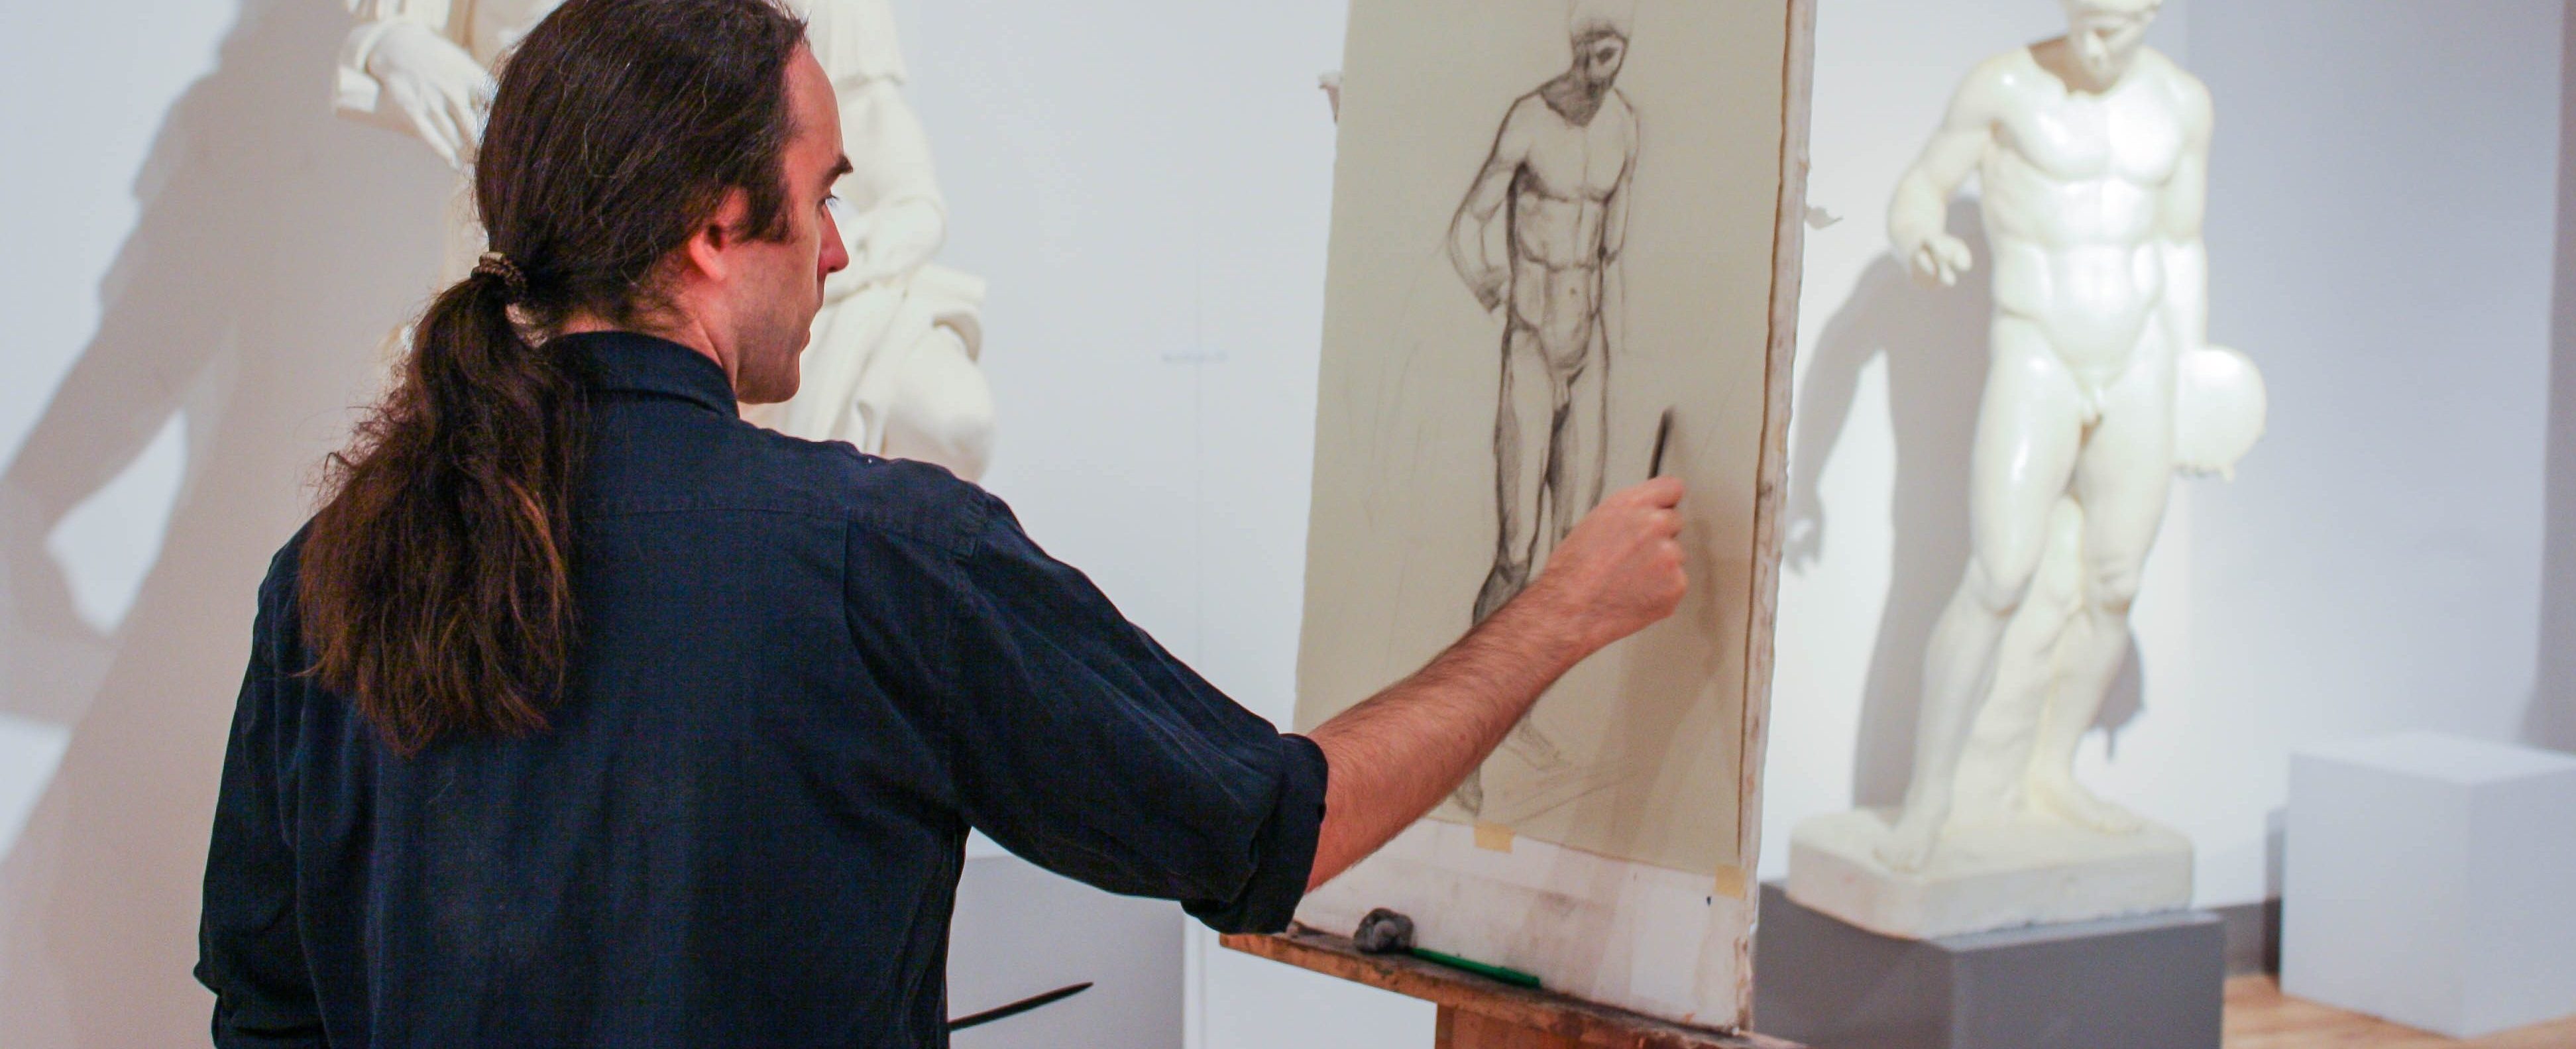 The best drawing classes in NYC